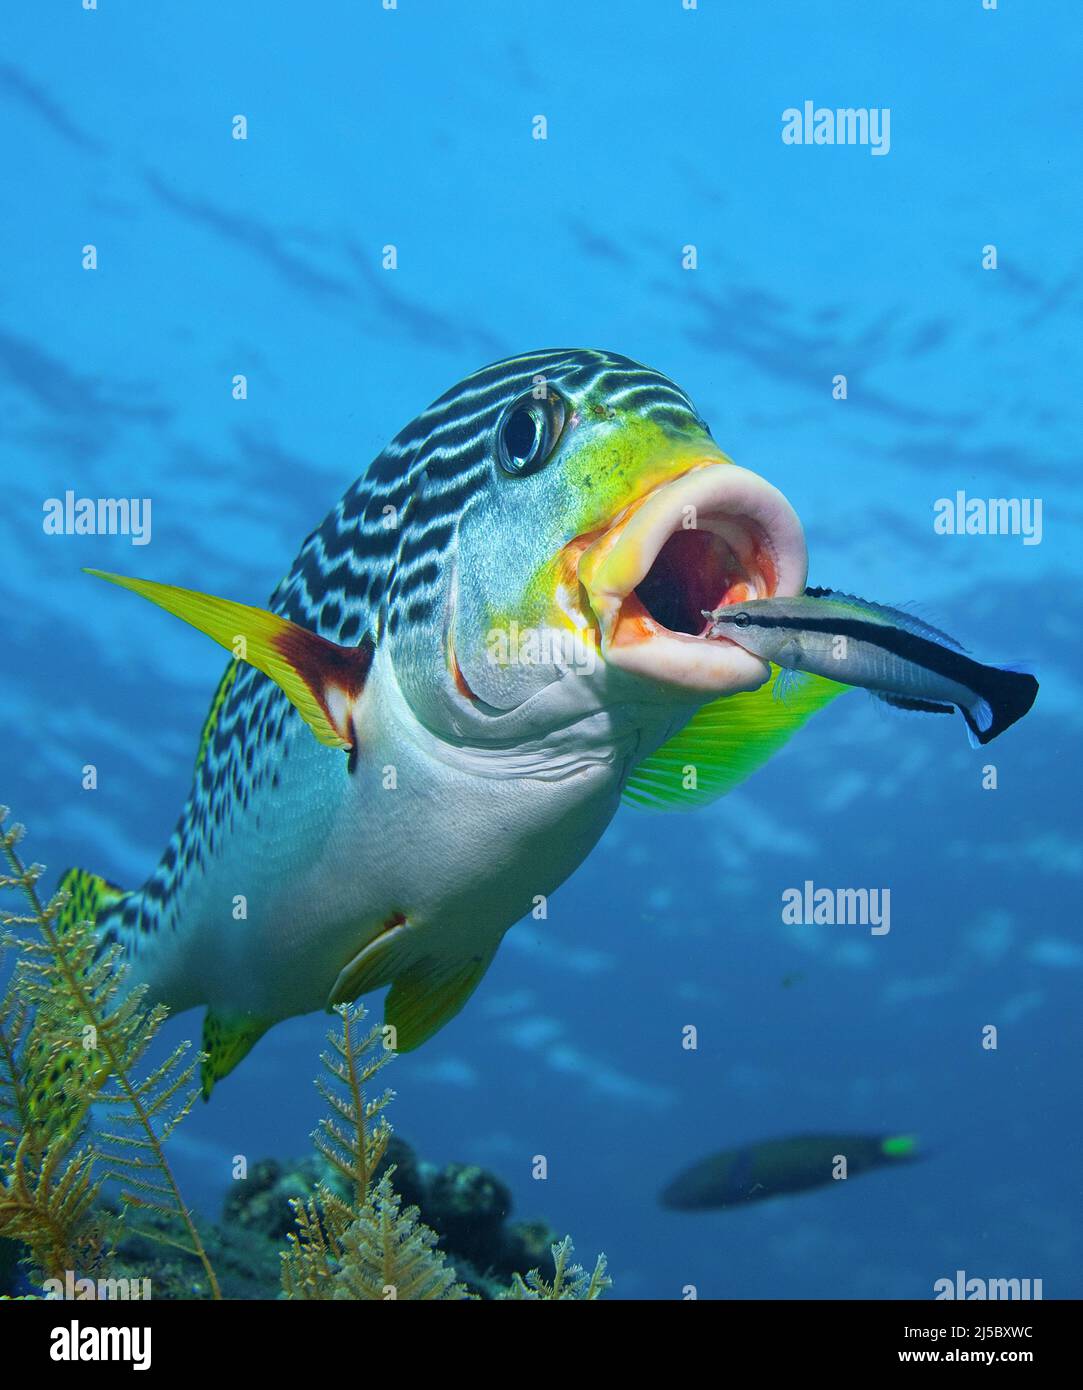 Cleaner fish (Labroides dimidiatus) cleaning a Lined sweetlip or Yellowbanded Sweetlip (Plectorhinchus lineatus), Bali, Indonesia Stock Photo